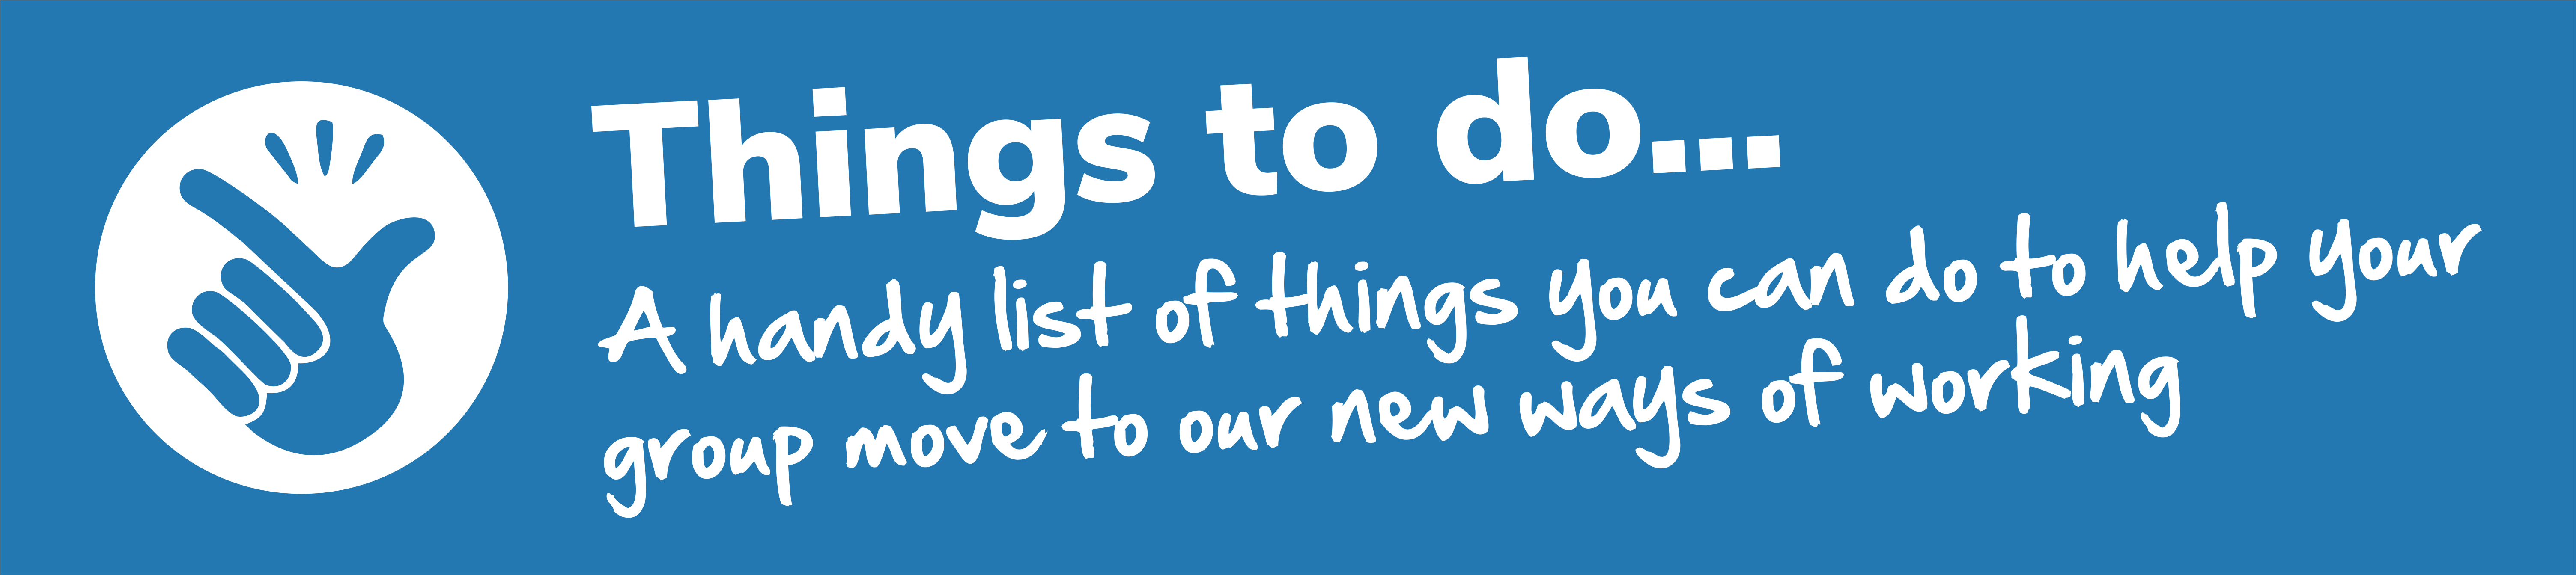 Things to do... A handy list of things you can do to help your group move to our new ways of working